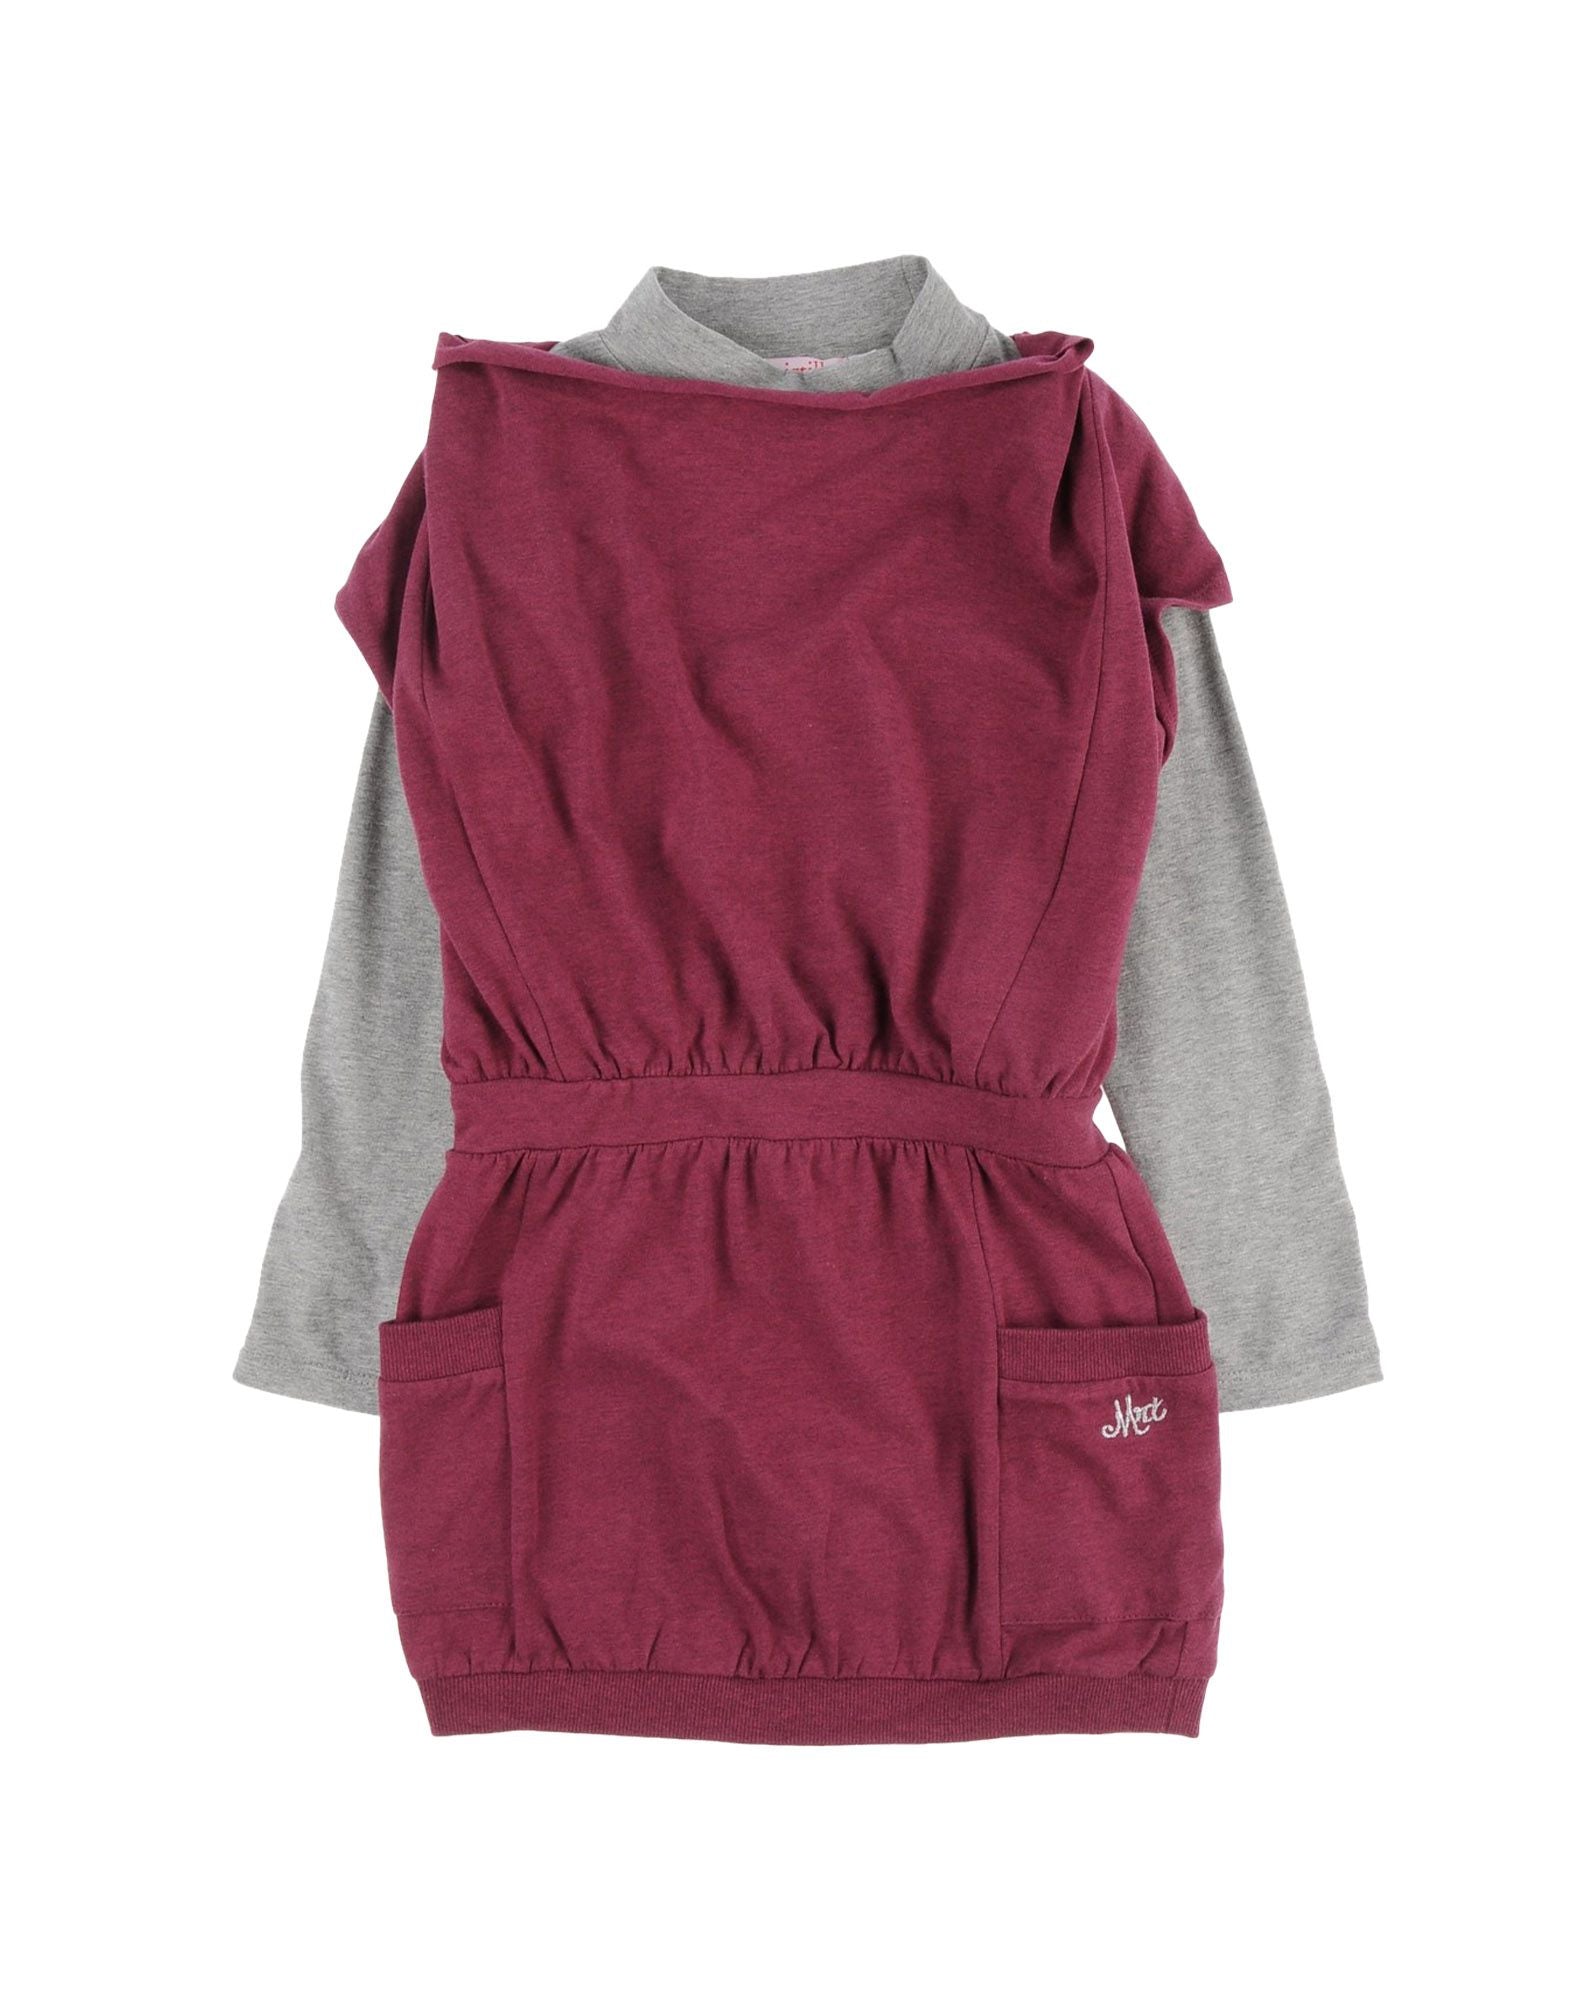 
  Dress from the Mirtillo girl's clothing line with mock neck and sleeves in
  contrast of color...